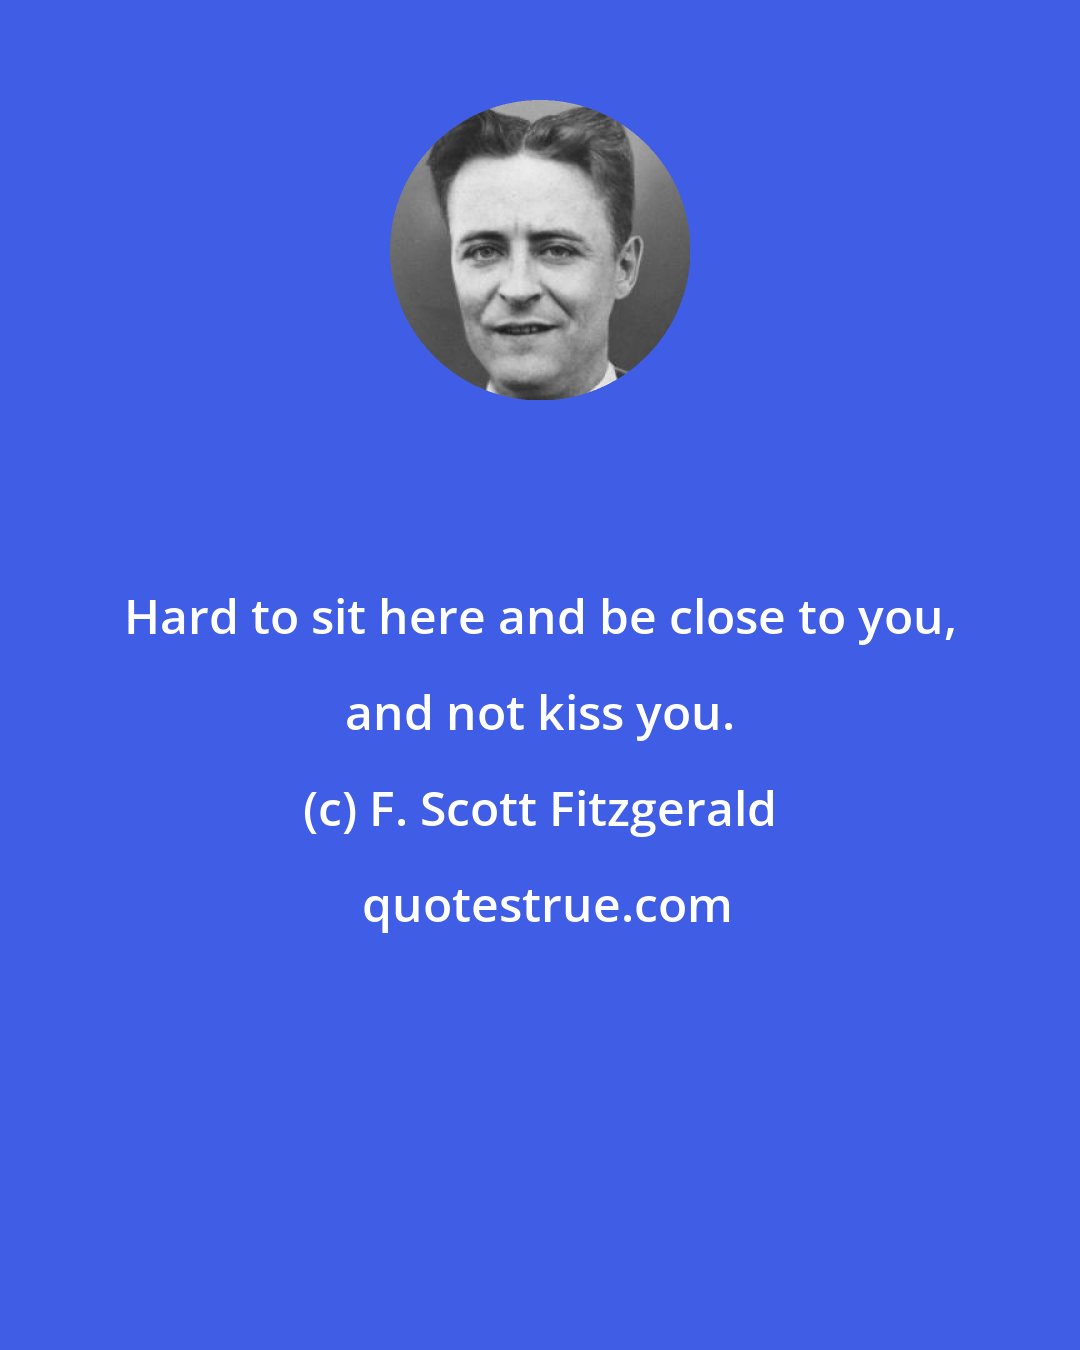 F. Scott Fitzgerald: Hard to sit here and be close to you, and not kiss you.